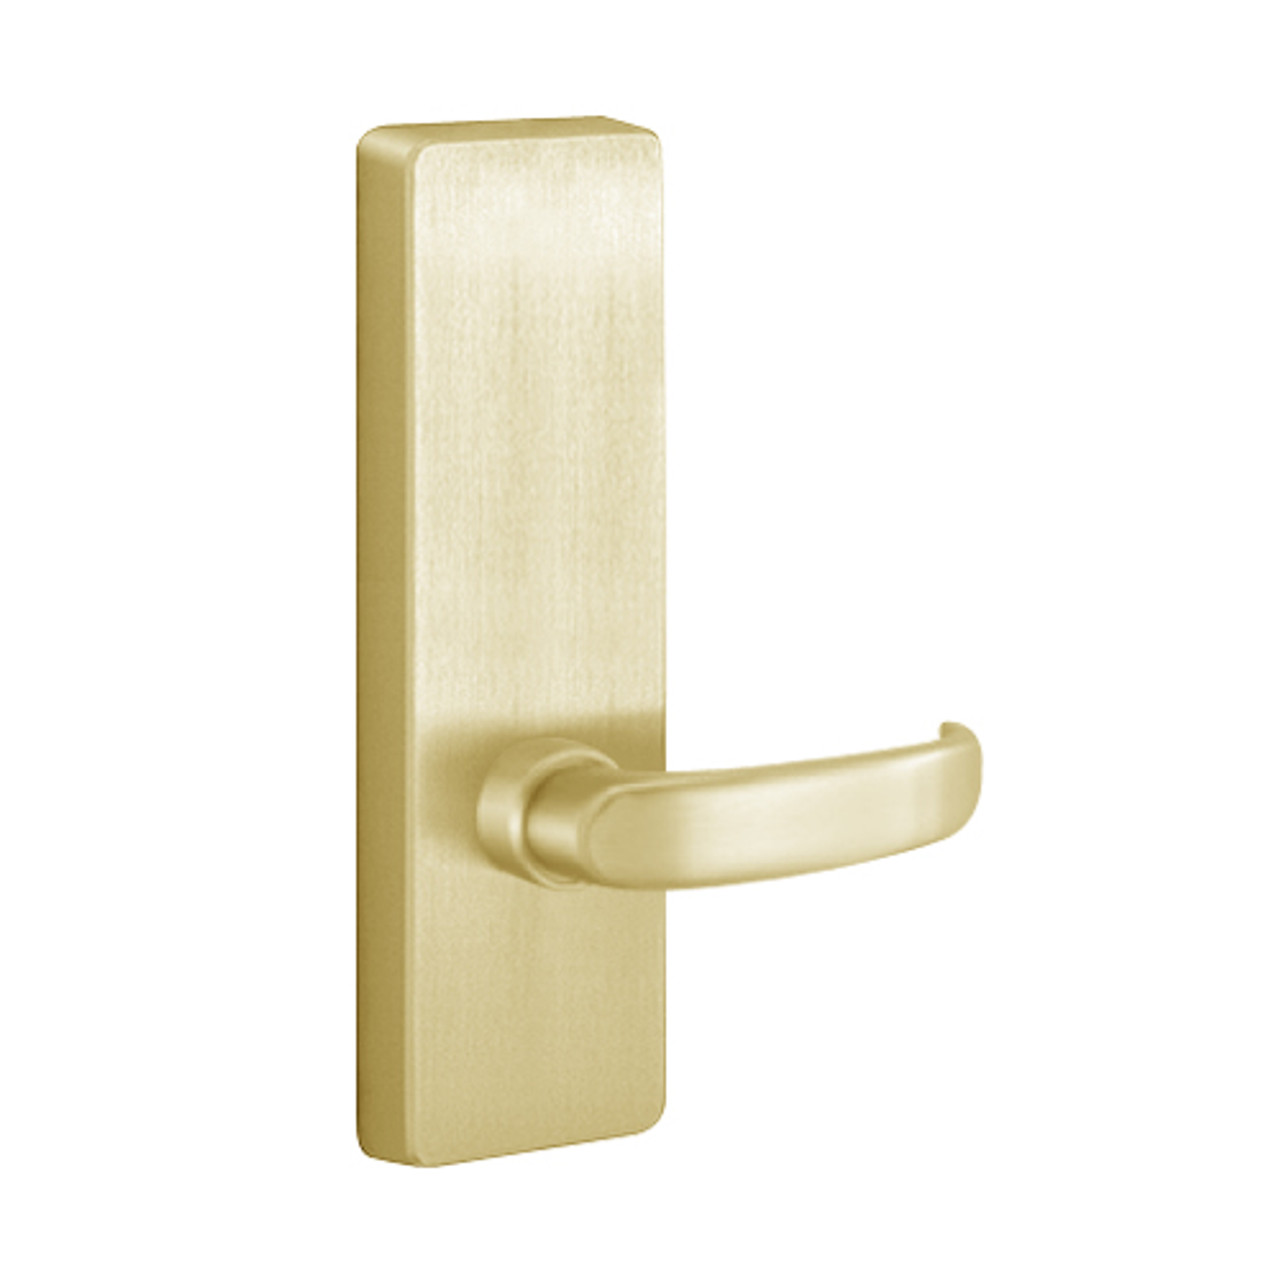 R4902D-605-LHR PHI Dummy Trim with D Lever Design for Apex and Olympian Series Exit Device in Bright Brass Finish